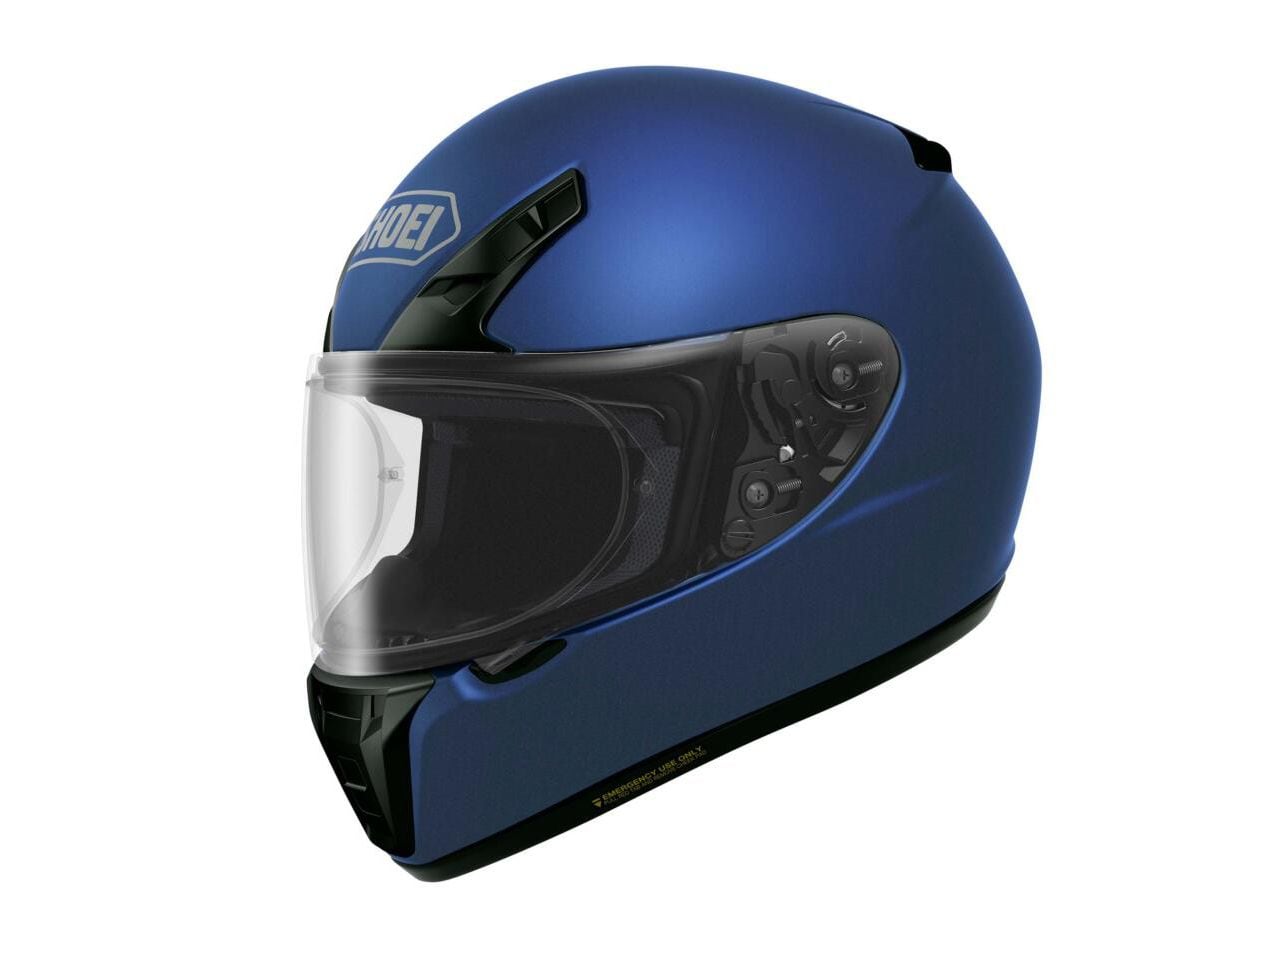 Mom will love a new lid, especially if it’s a high-quality one like the Shoei RF-SR.